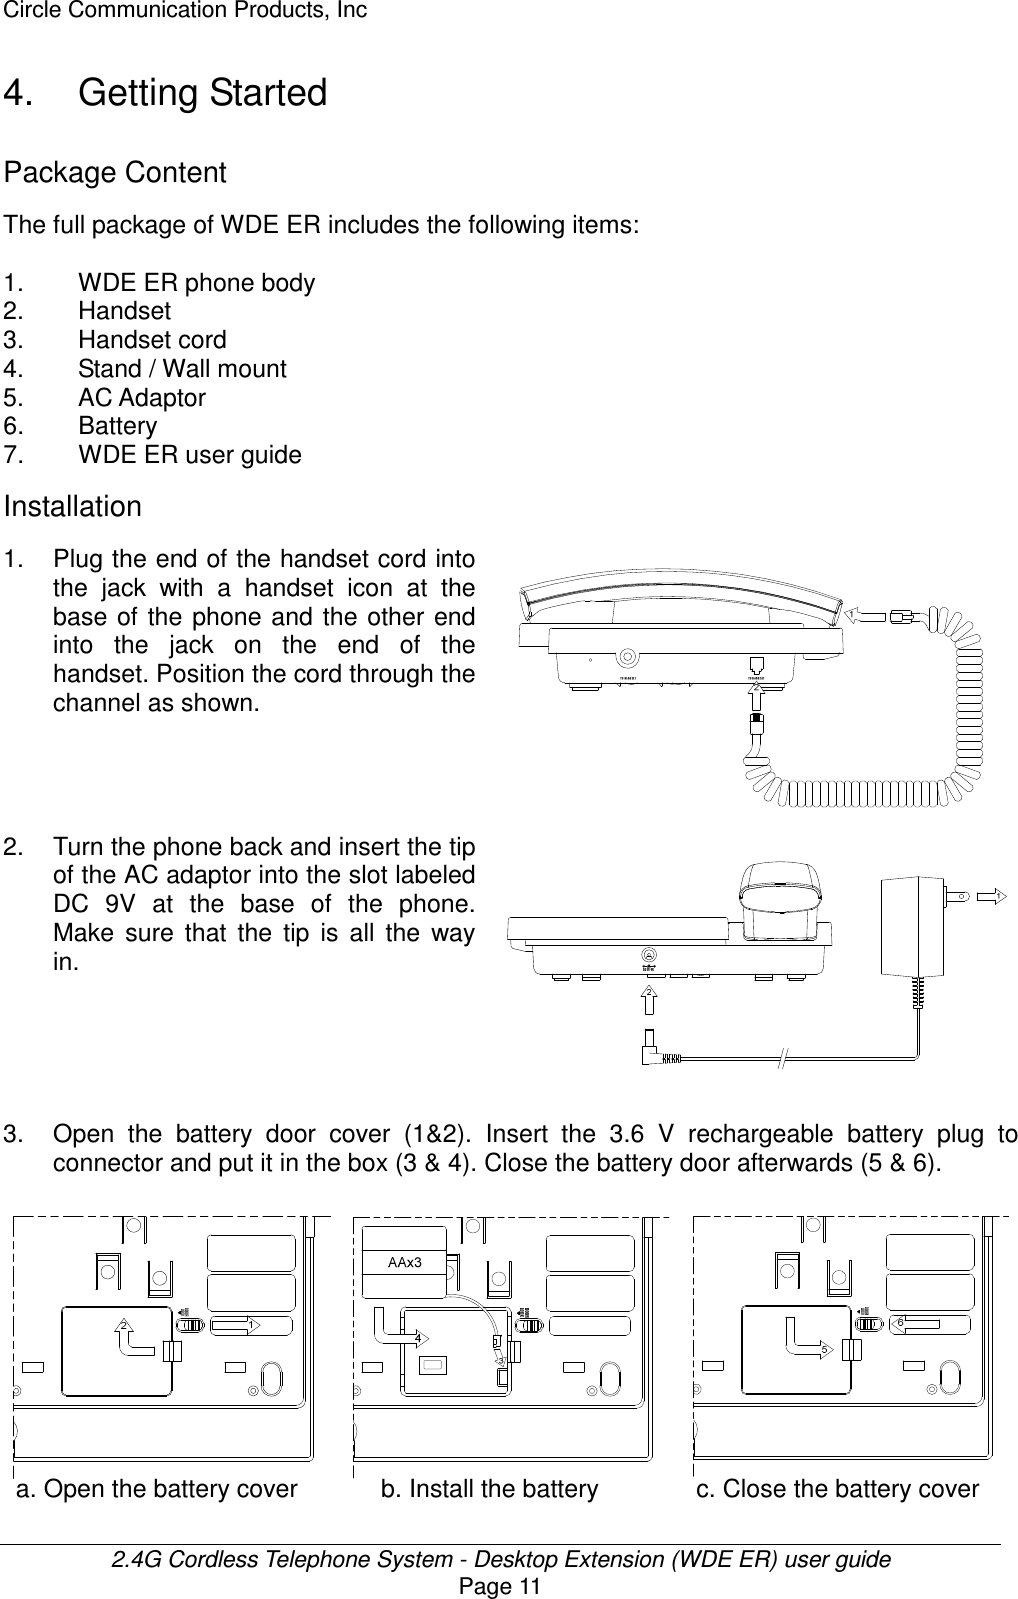 Circle Communication Products, Inc  2.4G Cordless Telephone System - Desktop Extension (WDE ER) user guide Page 11 4.  Getting Started Package Content The full package of WDE ER includes the following items:    1.  WDE ER phone body 2.  Handset 3.  Handset cord 4.  Stand / Wall mount   5.  AC Adaptor 6.  Battery 7.  WDE ER user guide Installation 1. Plug the end of the handset cord into the  jack  with  a  handset  icon  at  the base of  the  phone and  the  other  end into  the  jack  on  the  end  of  the handset. Position the cord through the channel as shown.      2.  Turn the phone back and insert the tip of the AC adaptor into the slot labeled DC  9V  at  the  base  of  the  phone. Make  sure  that  the  tip  is  all  the  way in.                3. Open  the  battery  door  cover  (1&amp;2).  Insert  the  3.6  V  rechargeable  battery  plug  to connector and put it in the box (3 &amp; 4). Close the battery door afterwards (5 &amp; 6).           a. Open the battery cover           b. Install the battery           c. Close the battery cover 